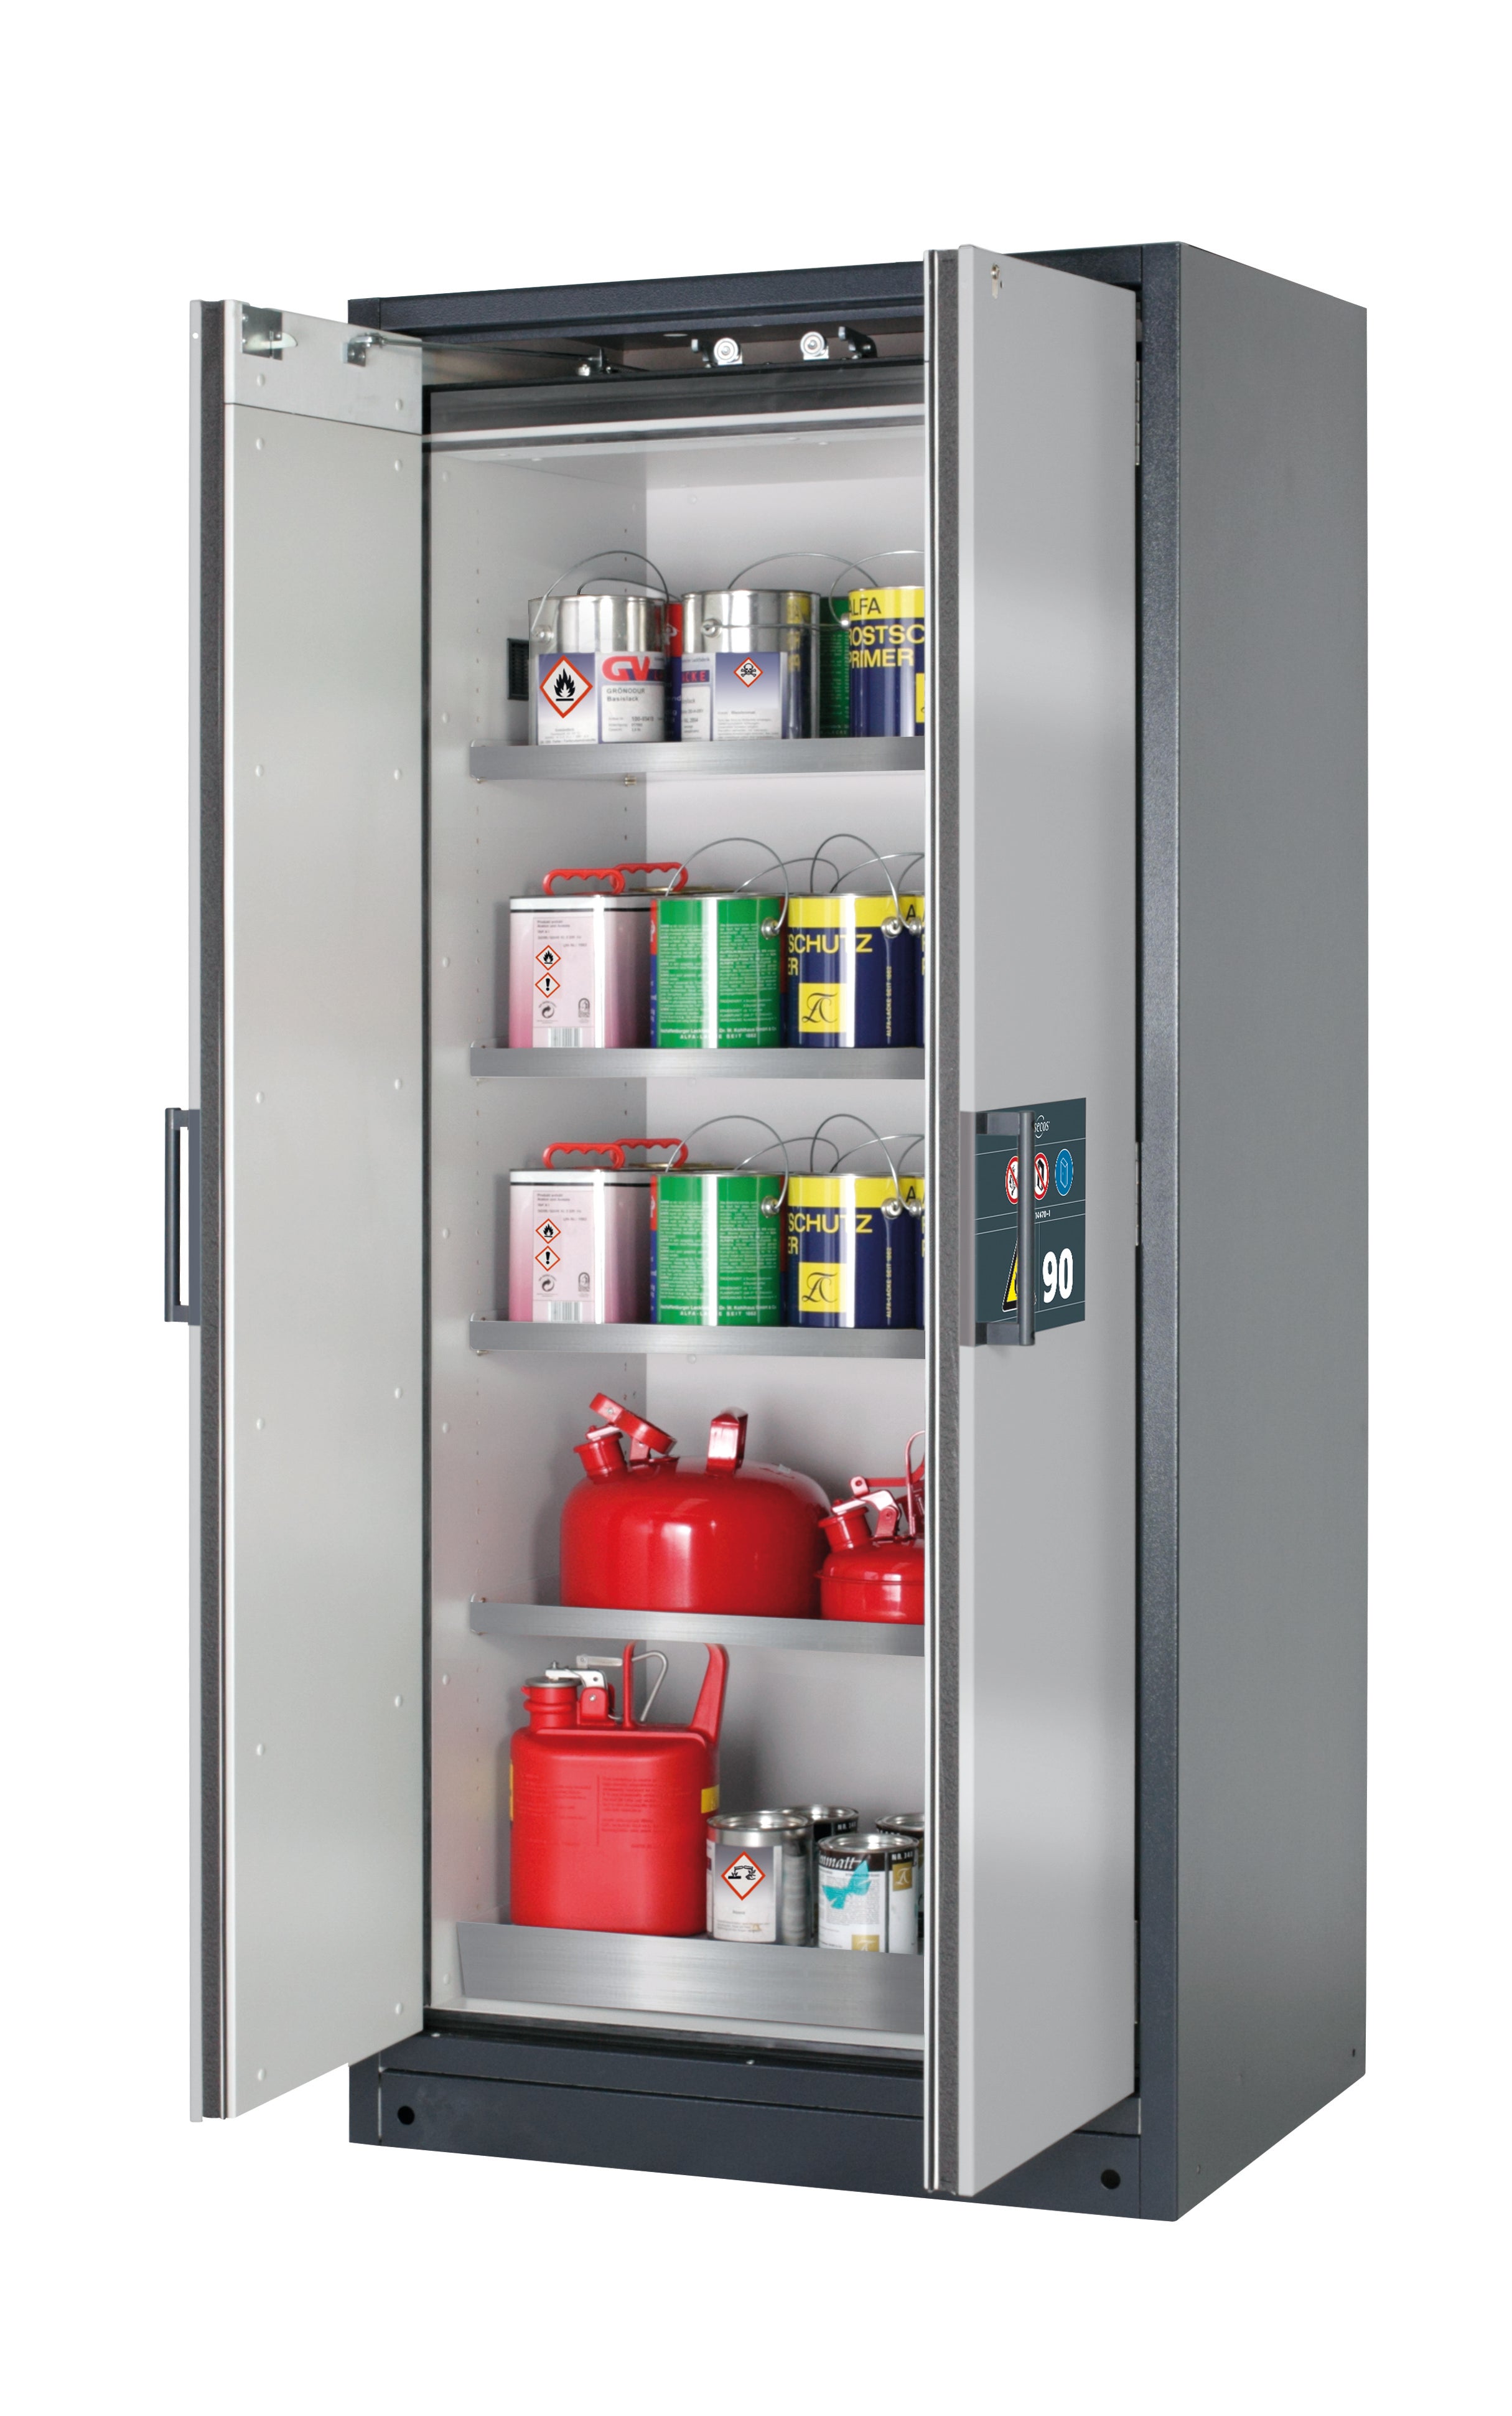 Type 90 safety storage cabinet Q-CLASSIC-90 model Q90.195.090 in asecos silver with 4x shelf standard (stainless steel 1.4301),